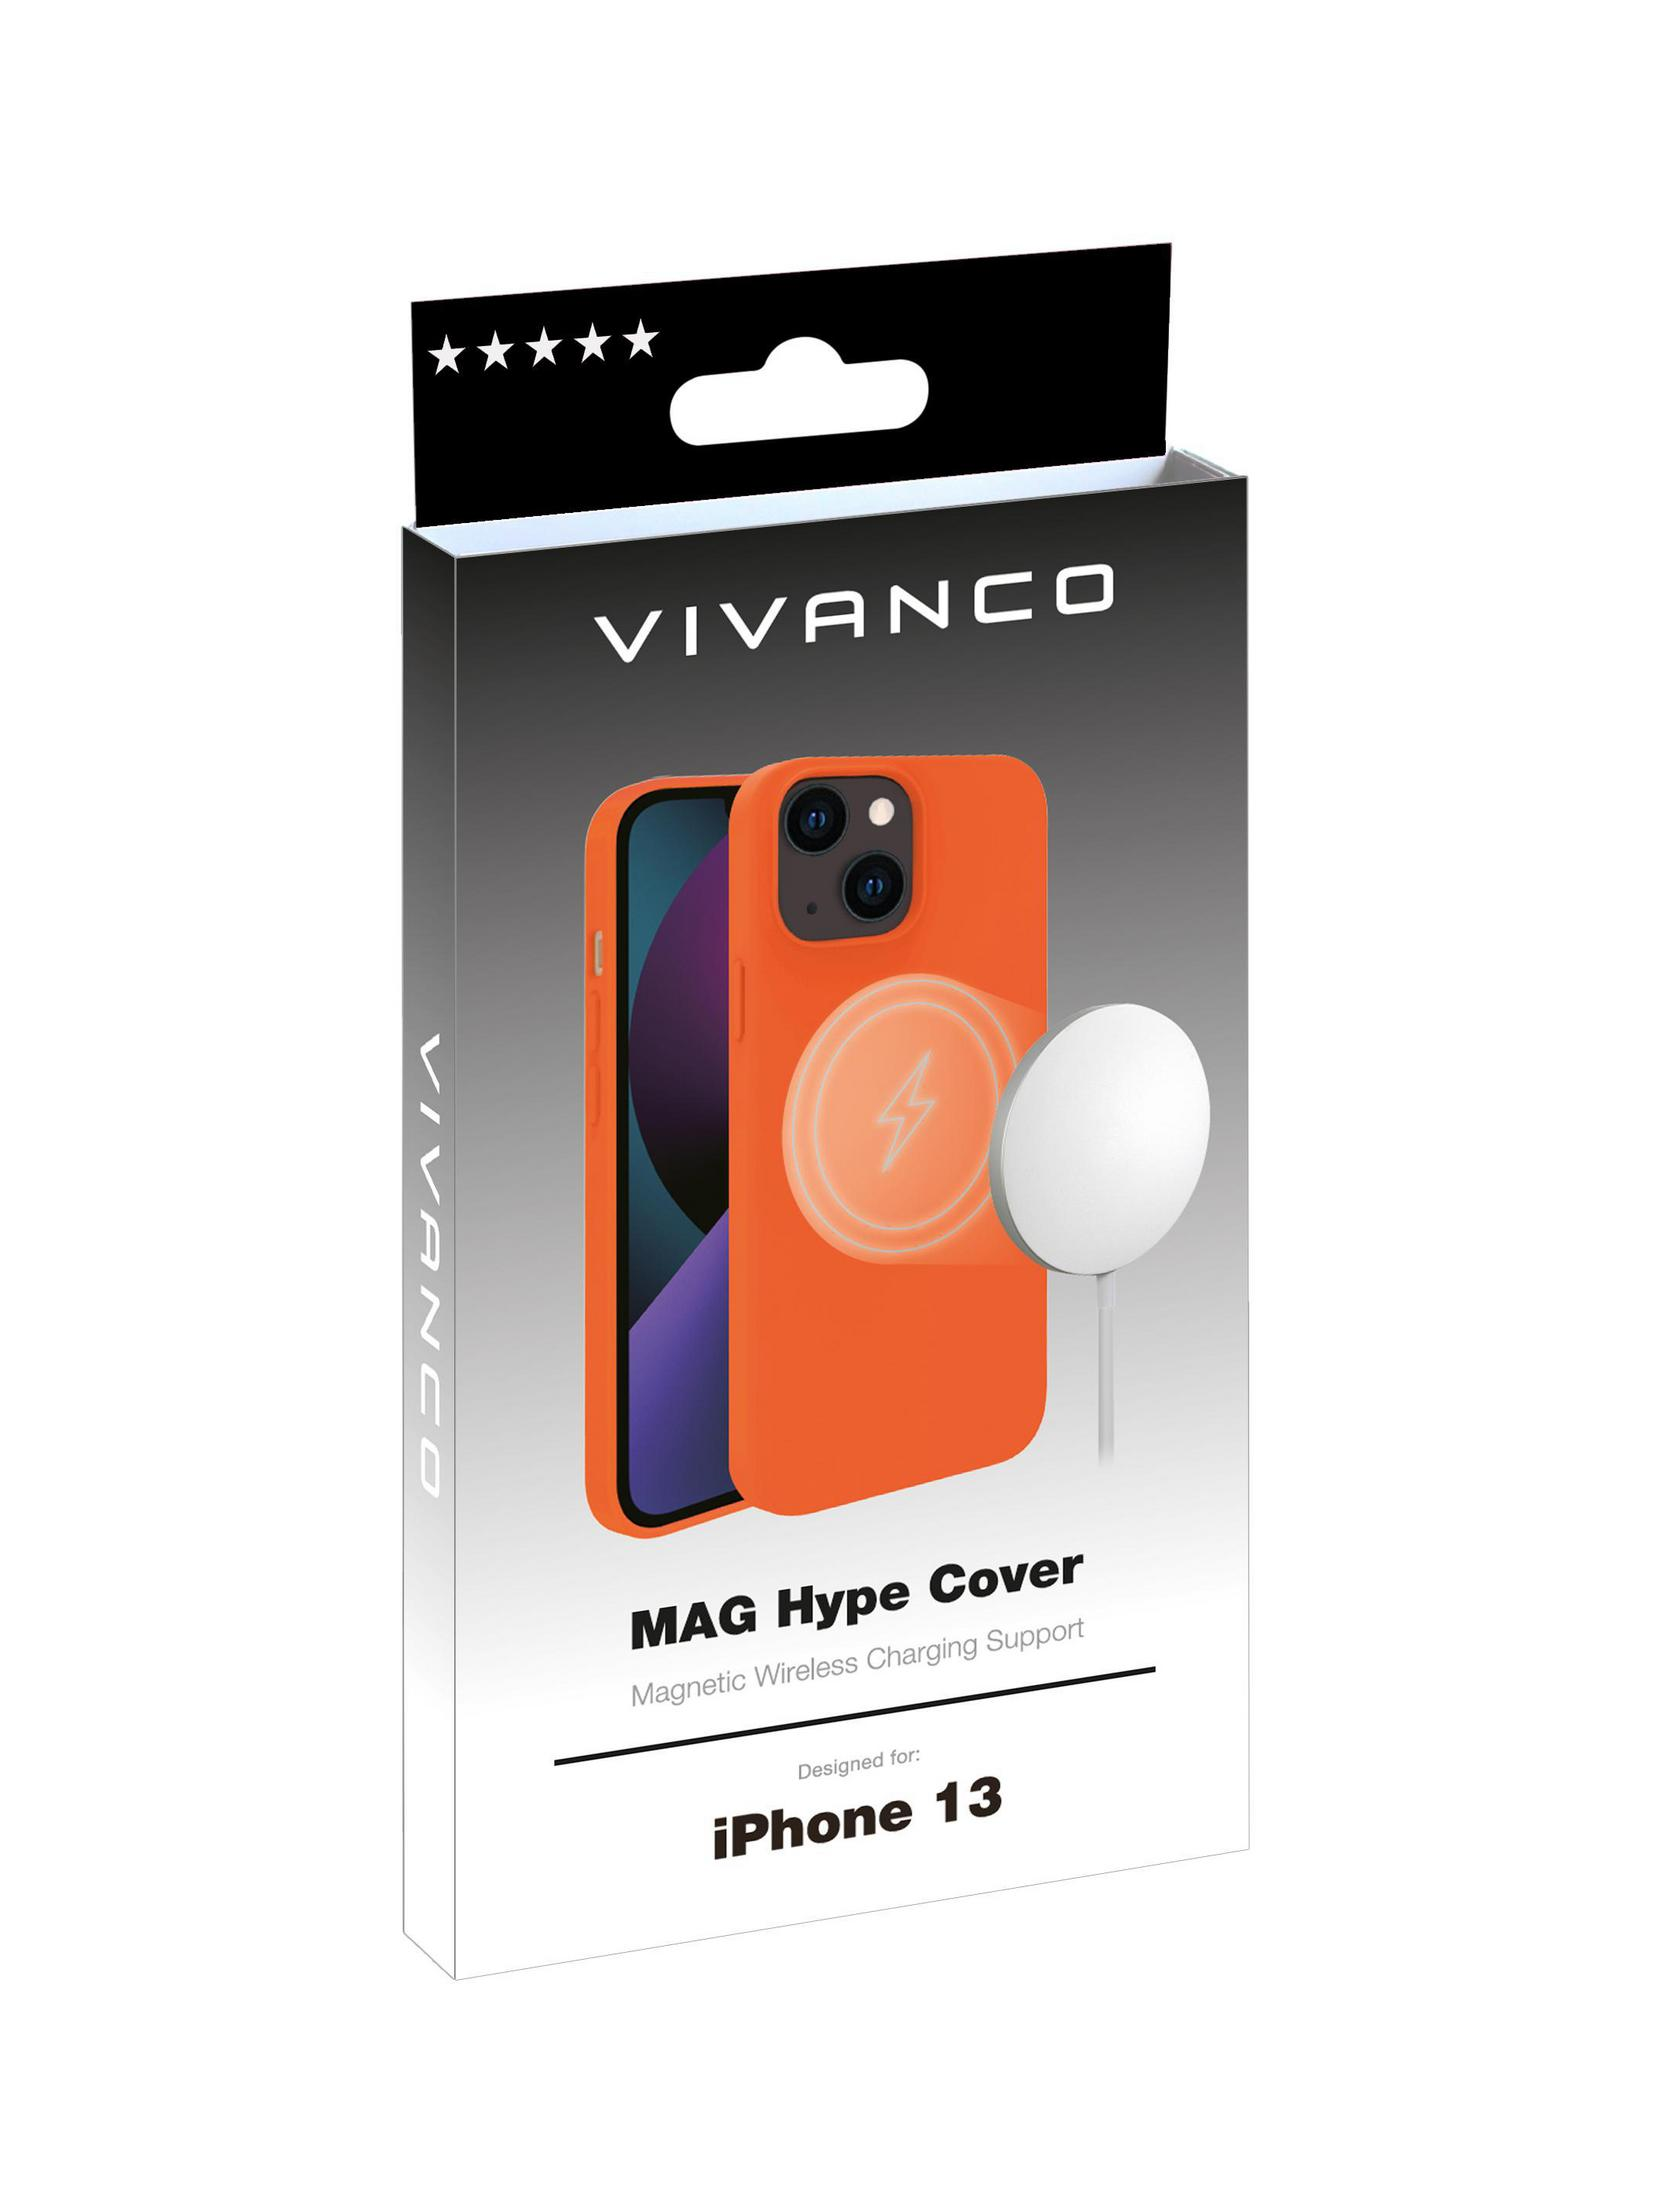 COVER iPhone Backcover, IPH13 13, MAGHYPE OR, 62946 VIVANCO Apple, Orange